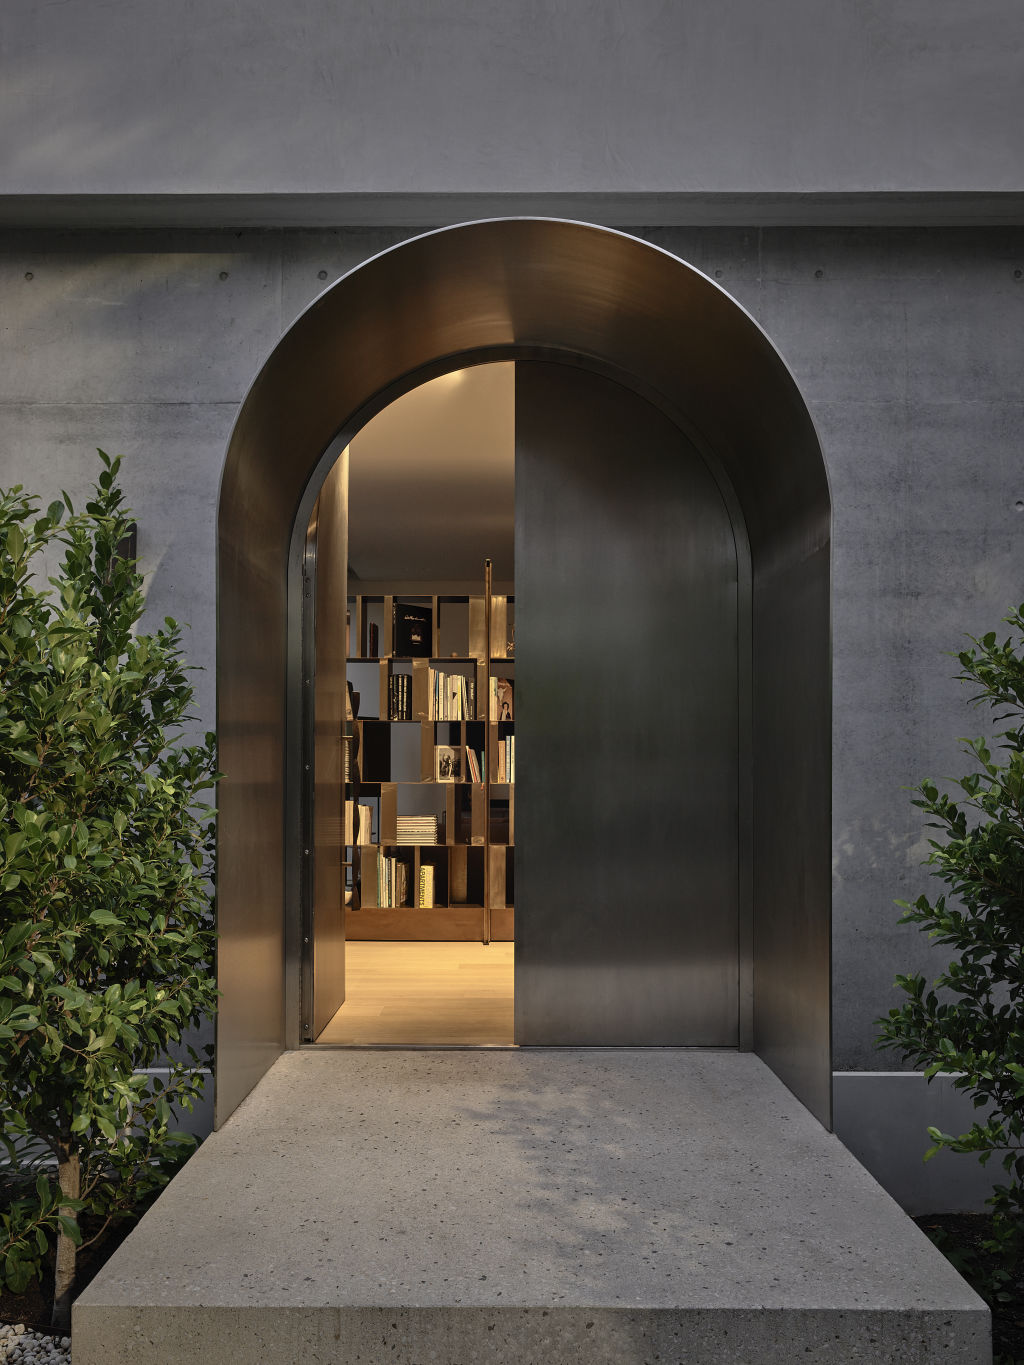 Inglis created a stunning arched stainless-steel entryway for a recent project. Photo: Derek Swalwell